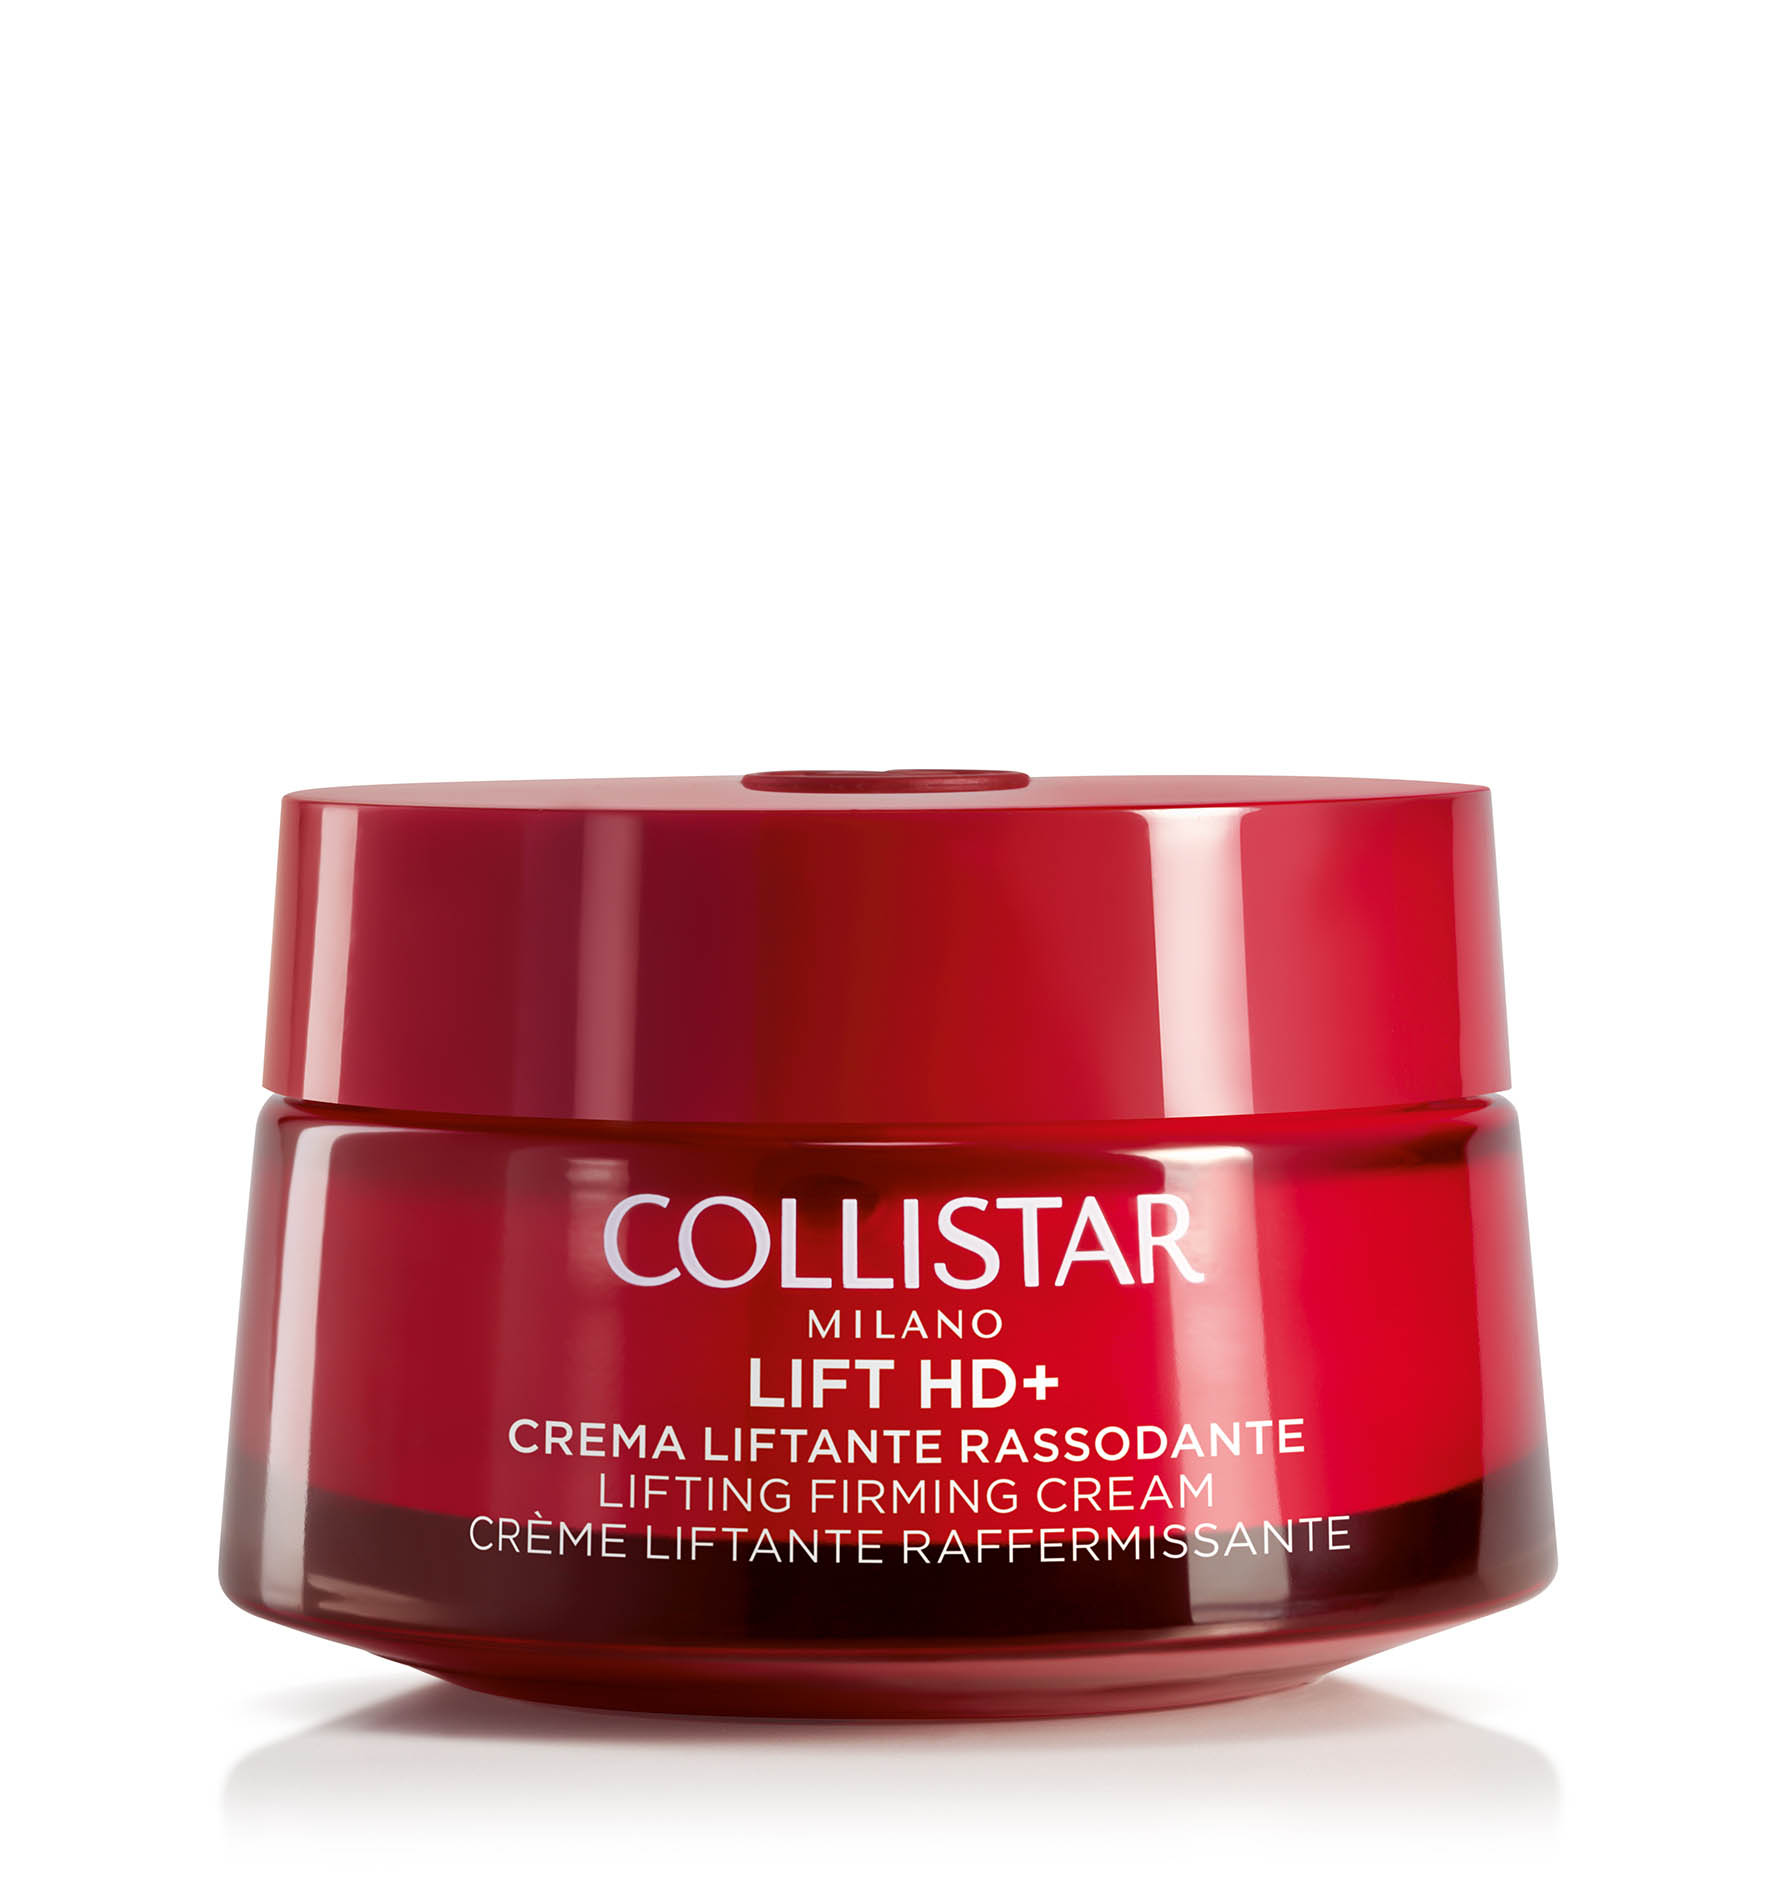 LIFT HD+ LIFTING FIRMING CREAM FACE AND NECK | Collistar - Shop Online Ufficiale